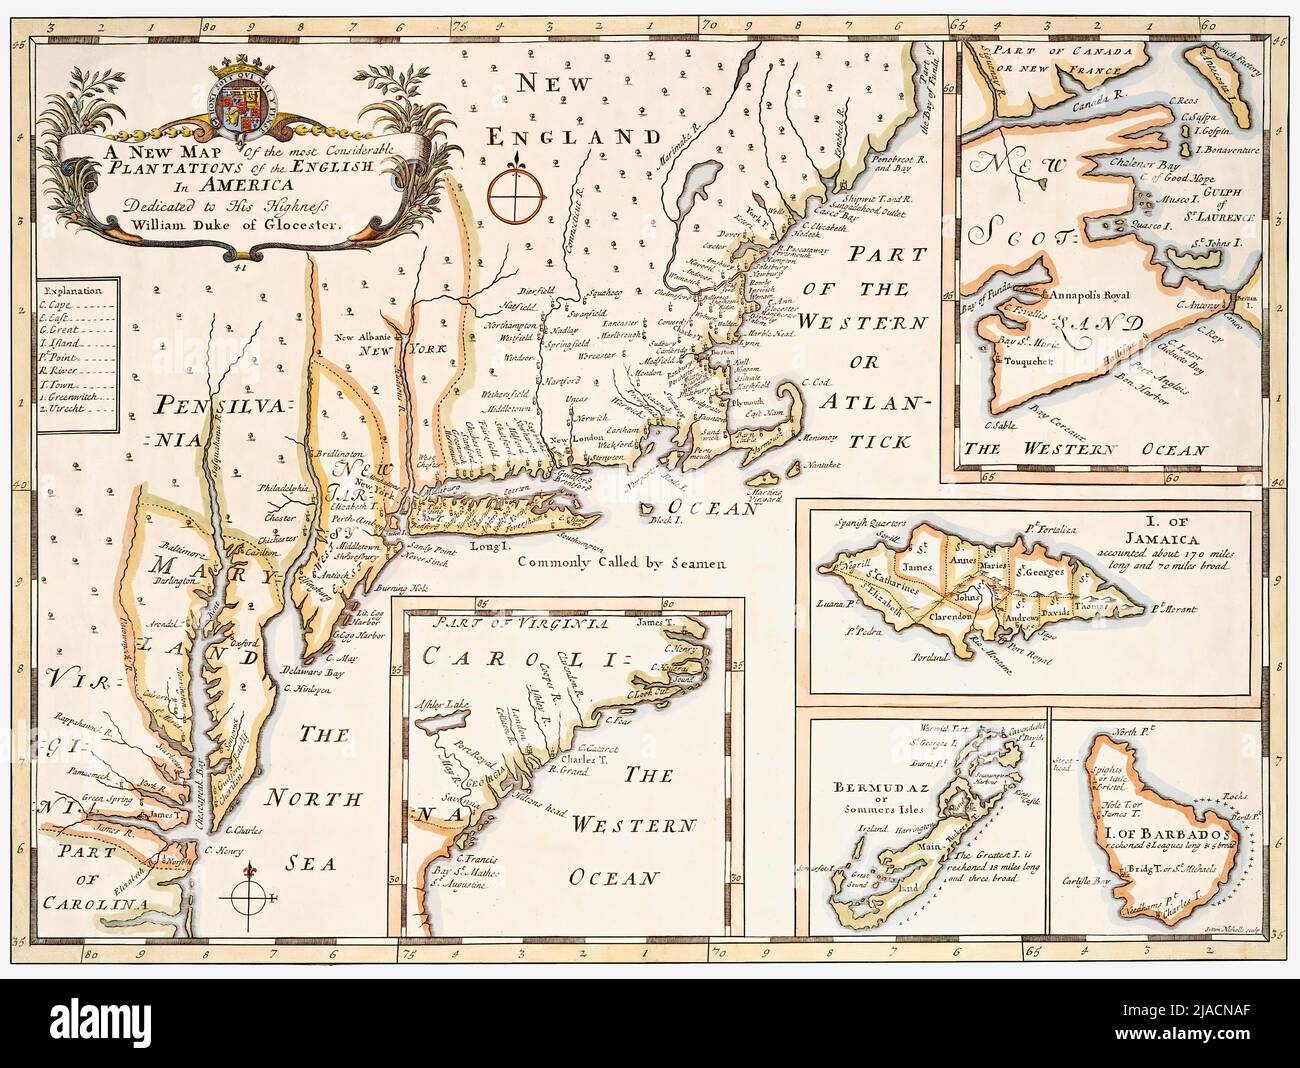 Title: A new map of the most considerable plantations of the English in America. This is a restored reproduction of an antique map that features an early depiction of the British Colonies in North America in the early 1700s. Insets show maps of Bermuda, Barbados, the Carolinas, Jamaica, and Nova Scotia. Stock Photo